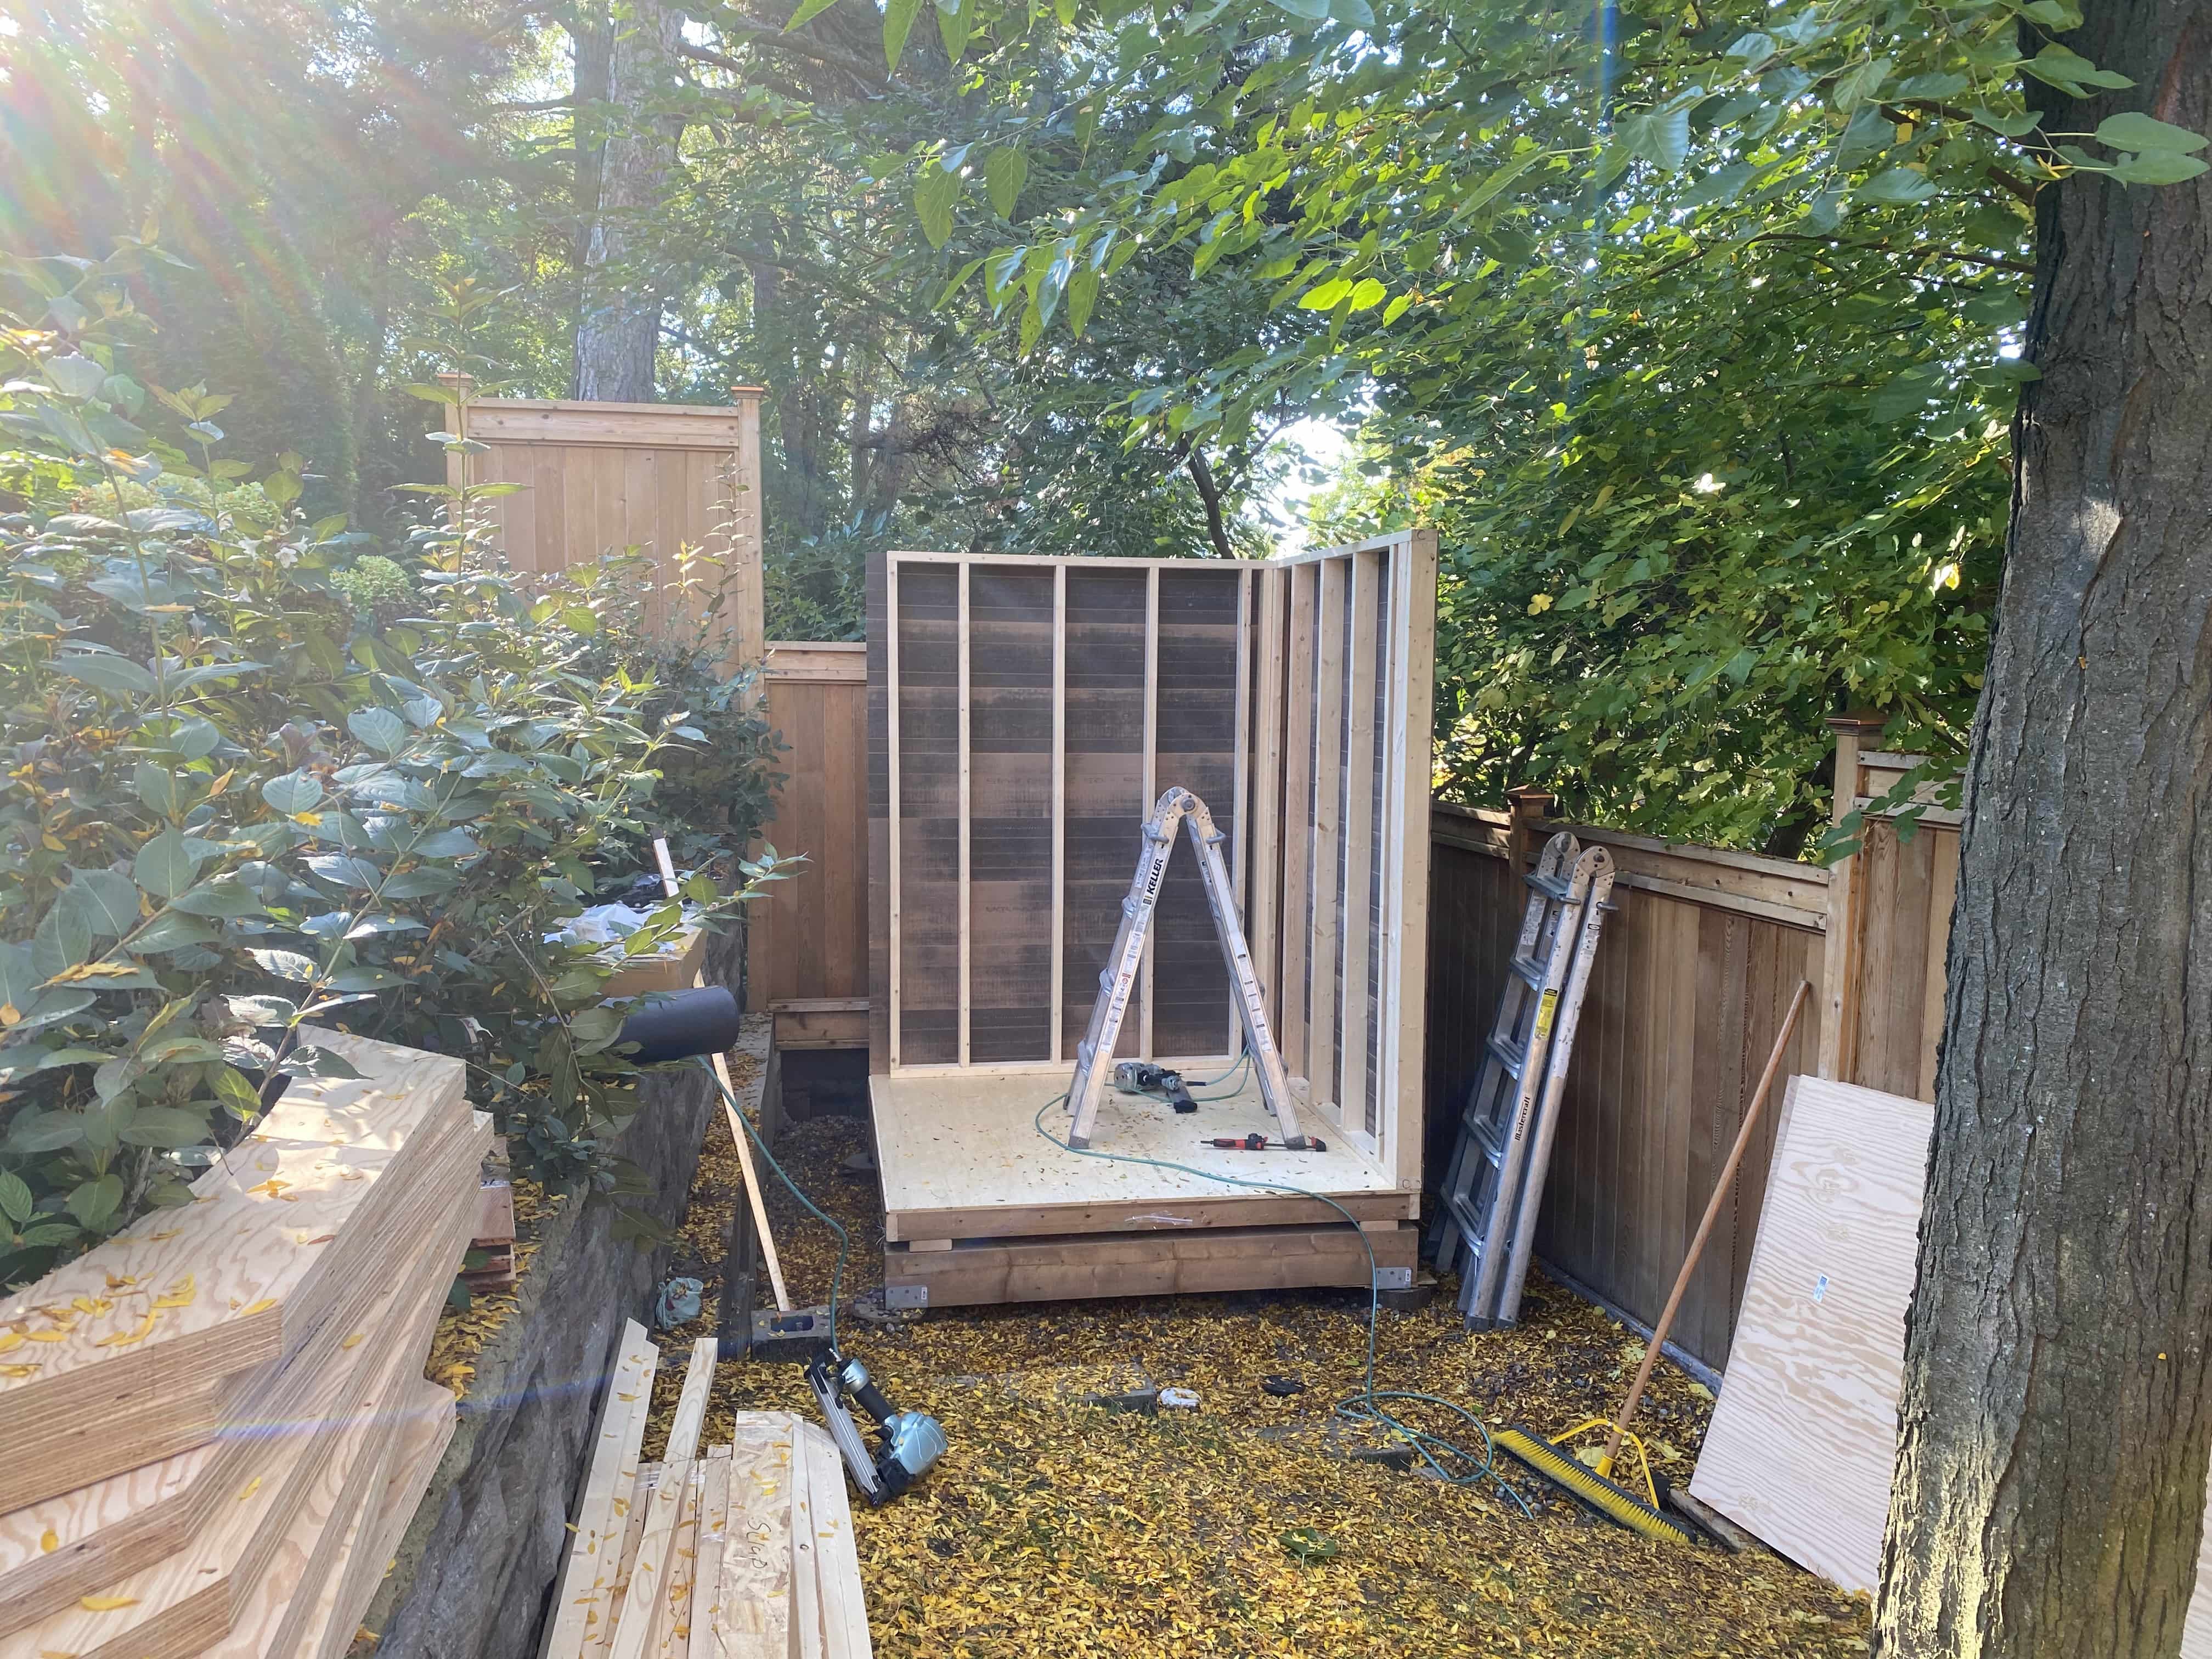 Construction view of 6’ x 6' Melbourne Garden Shed located in Toronto, Ontario – Summerwood Prod